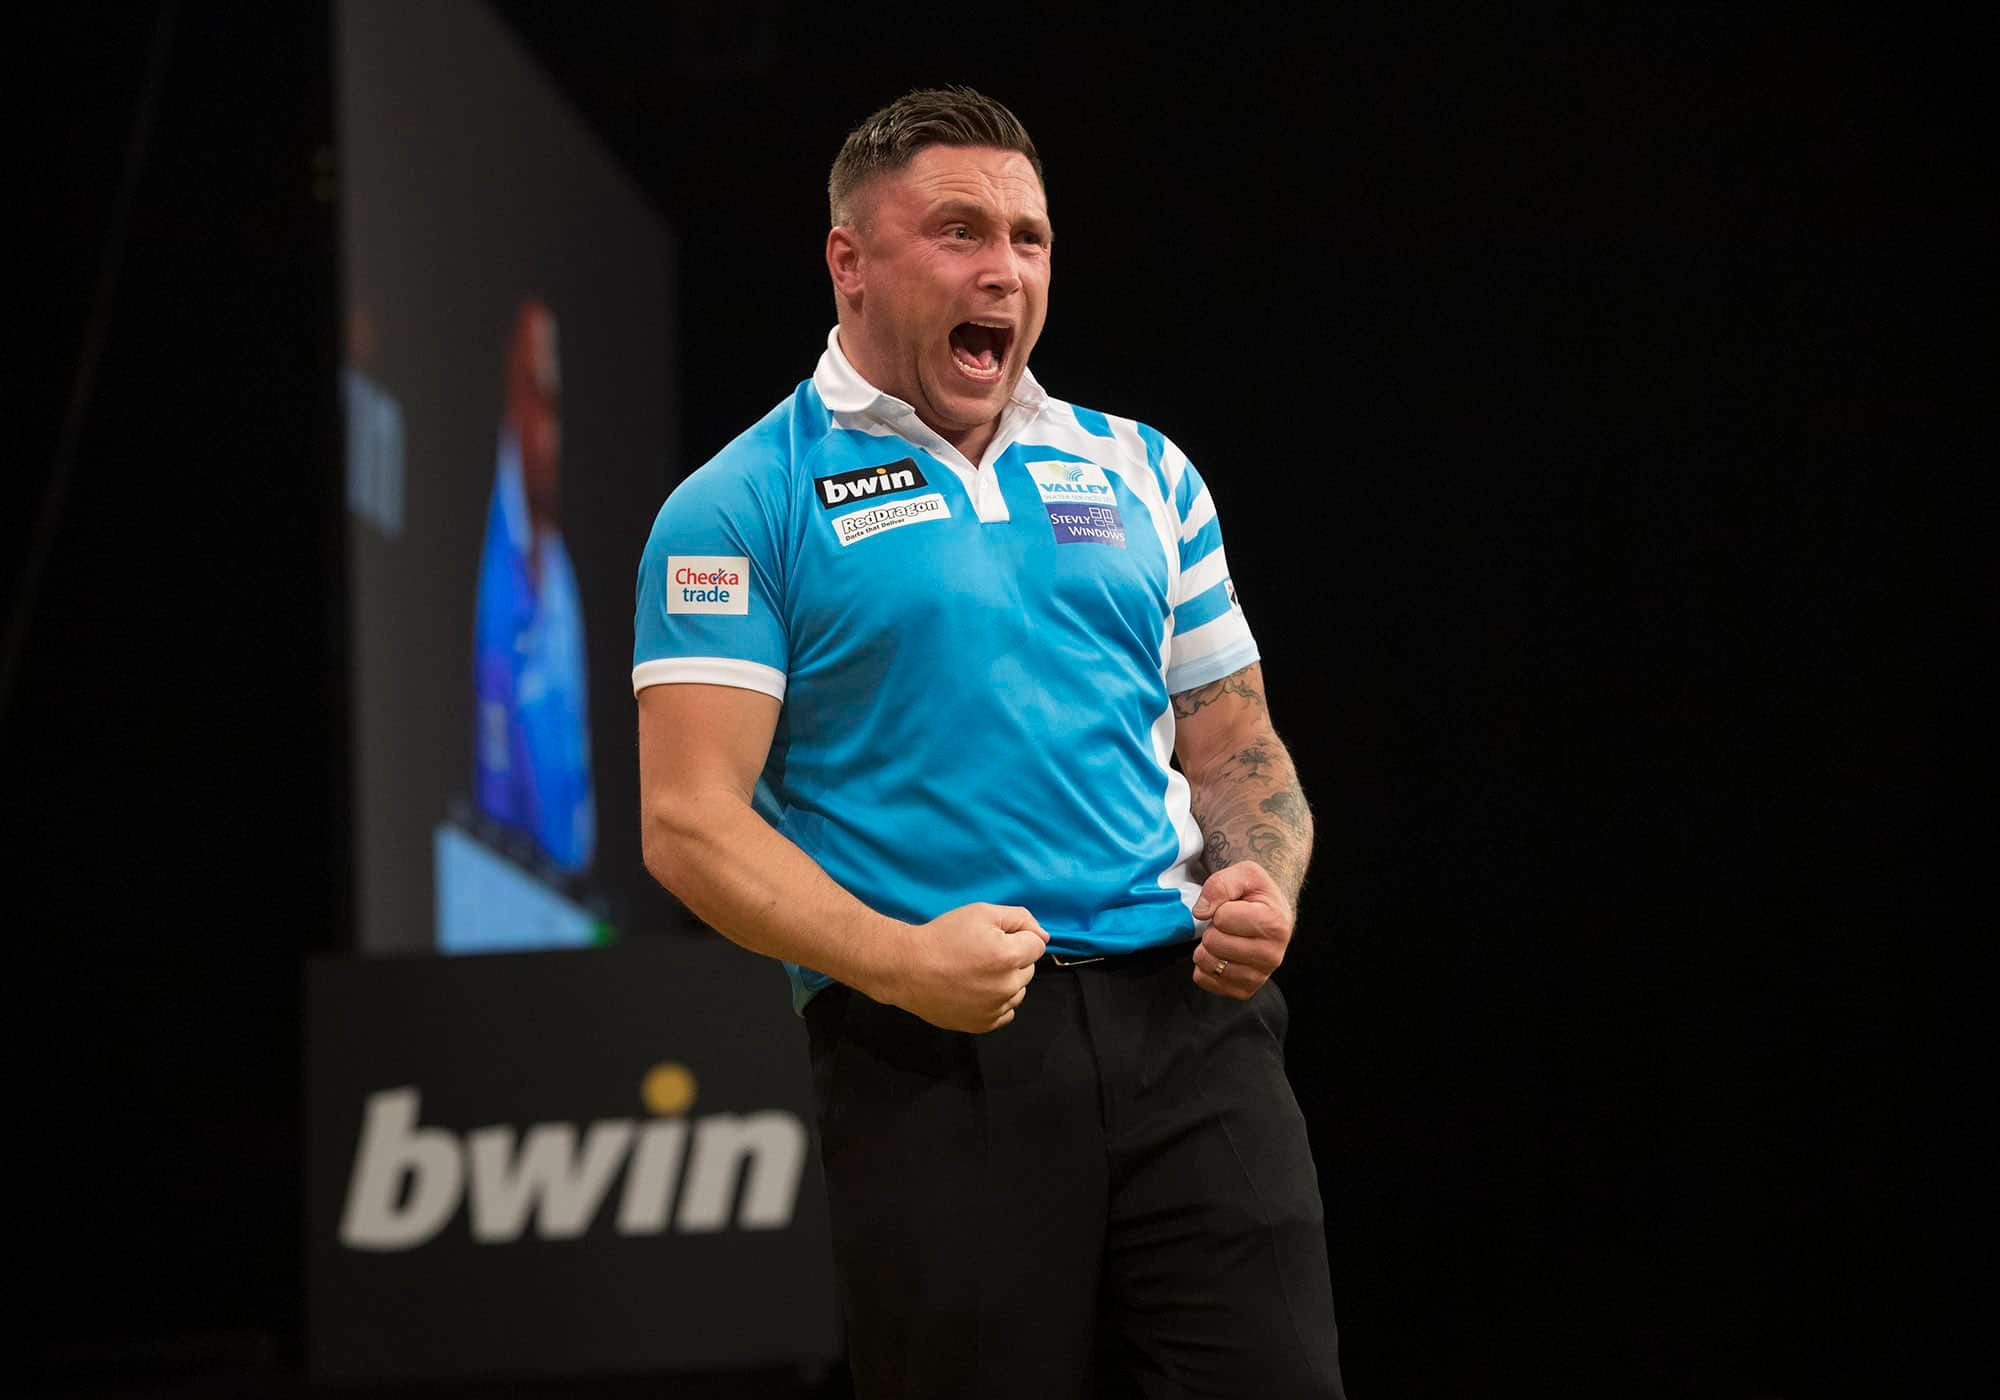 COLUMN: Being Cocky on the Oche: How Gerwyn Price’s punishment won’t stop gamesmanship in Darts